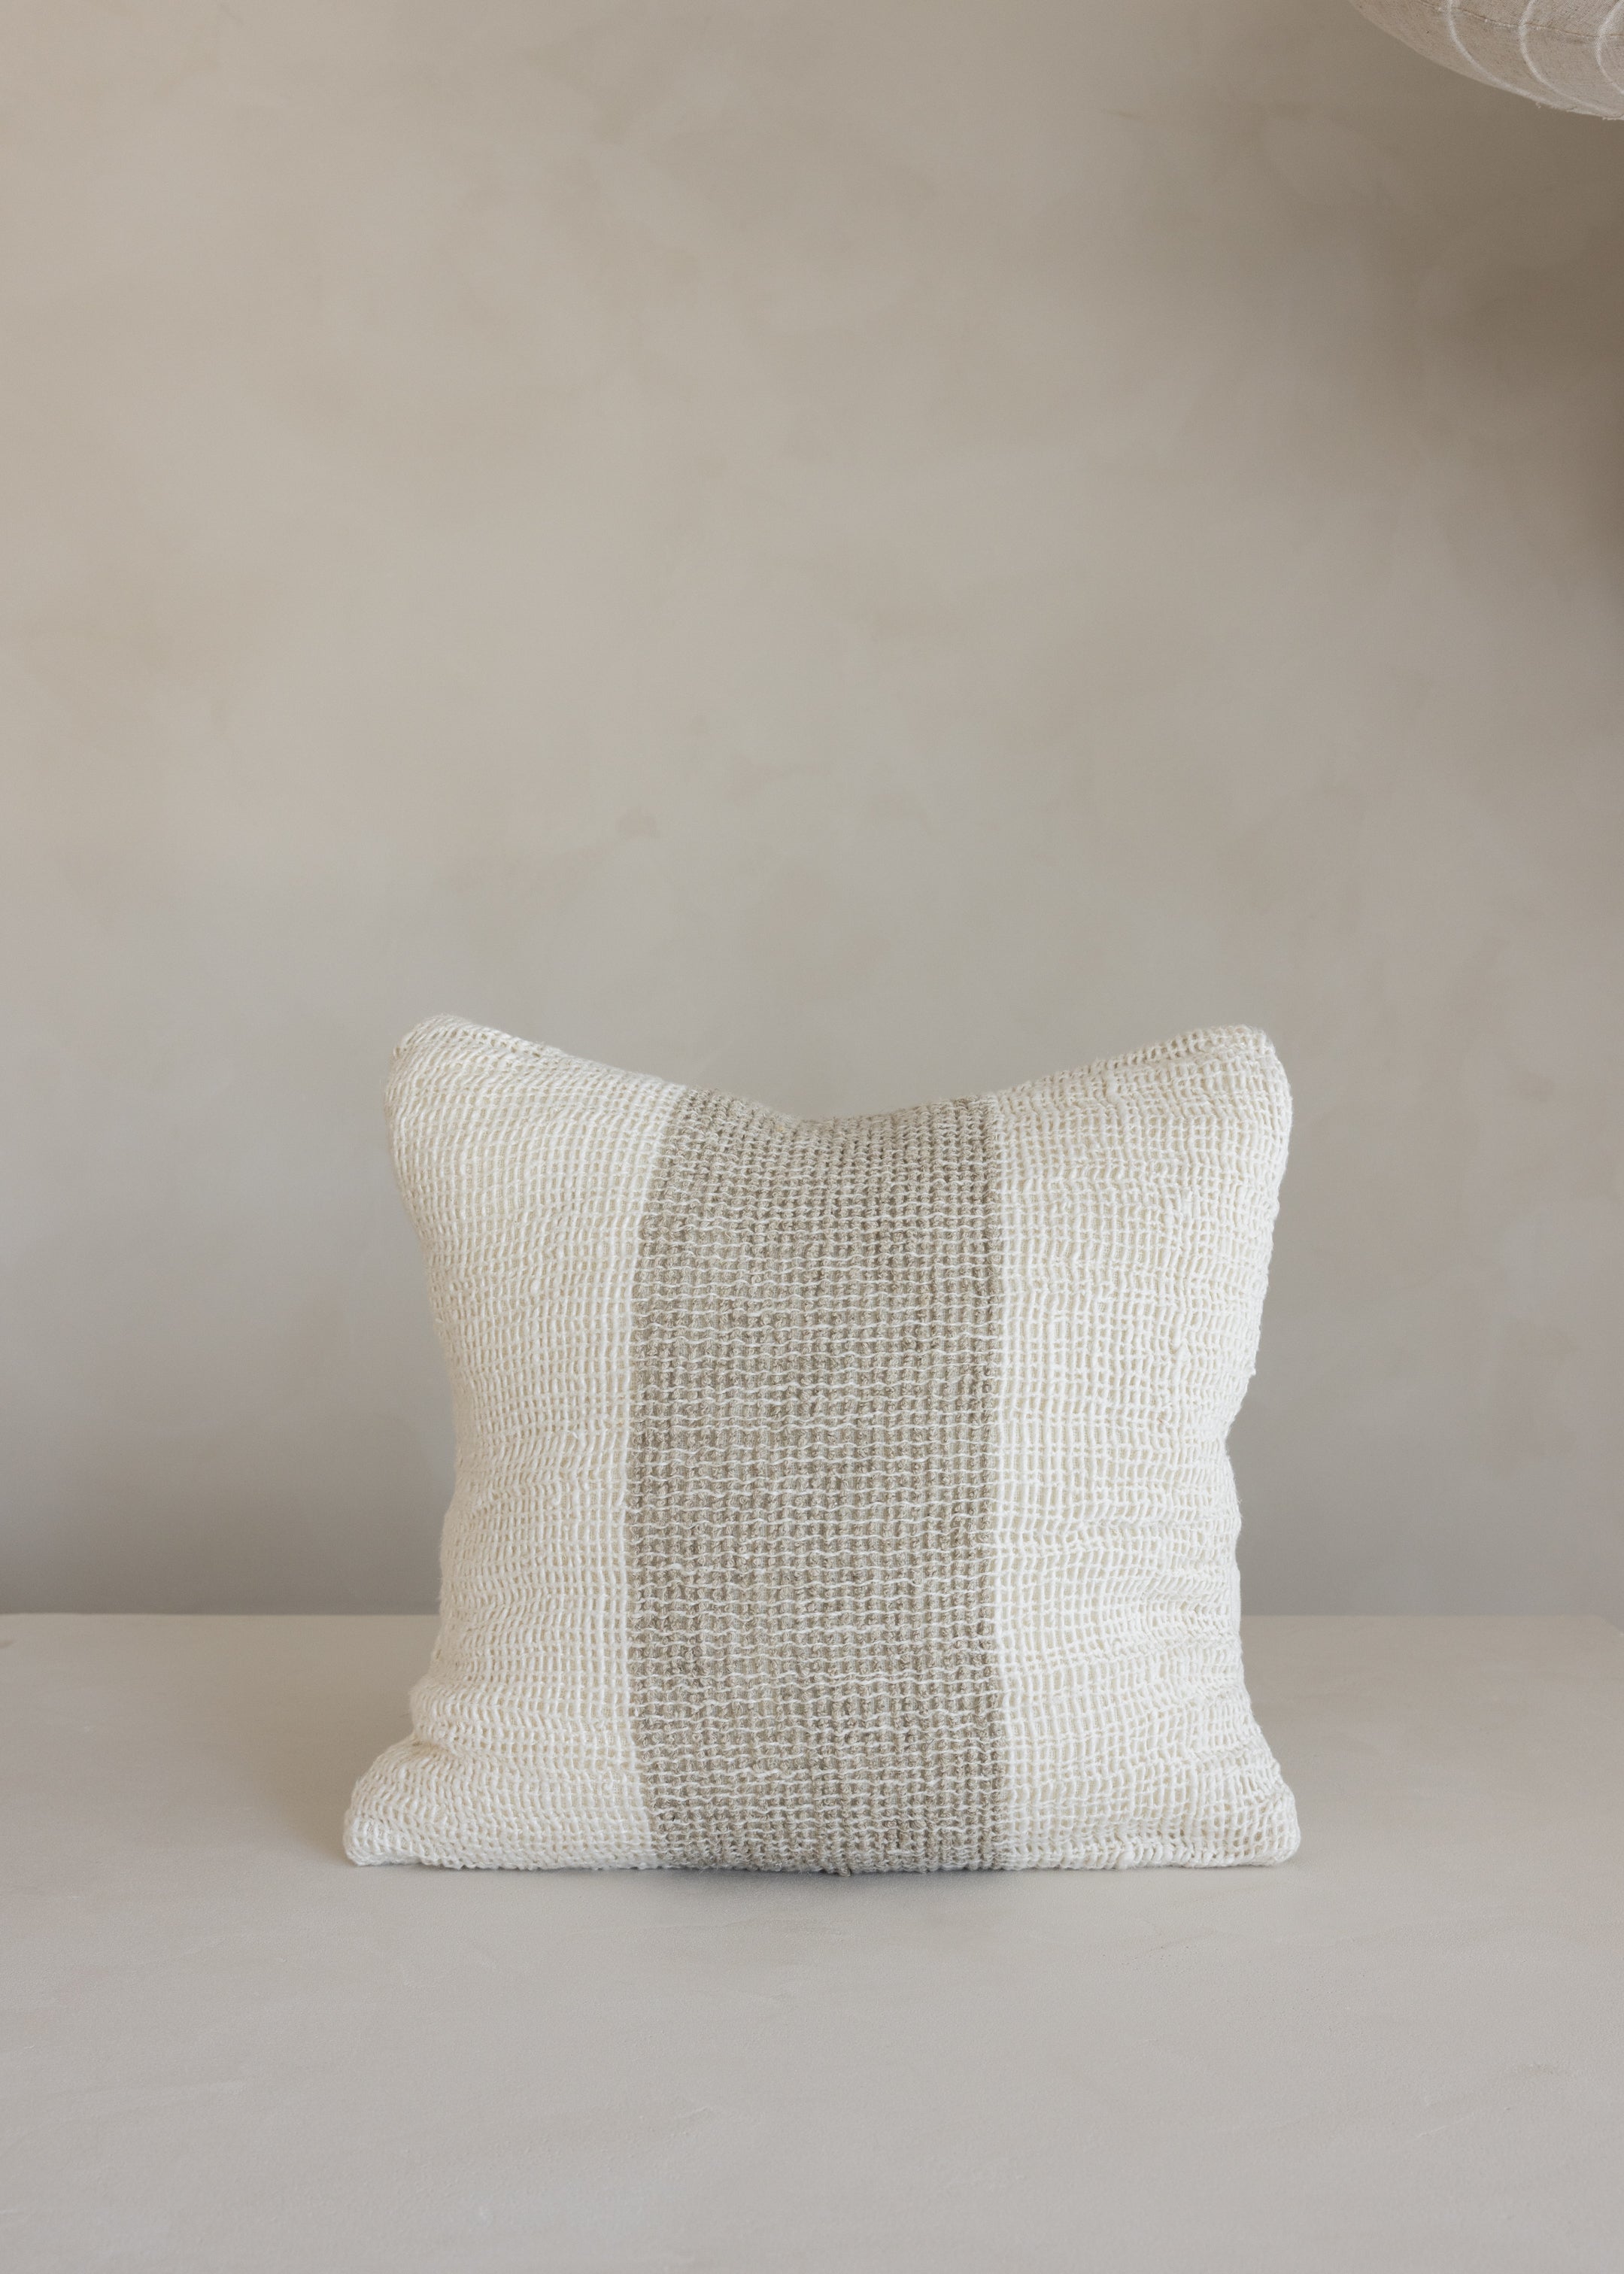 Coco Linen Cushion Cover Ivory & Natural / 50 x 50